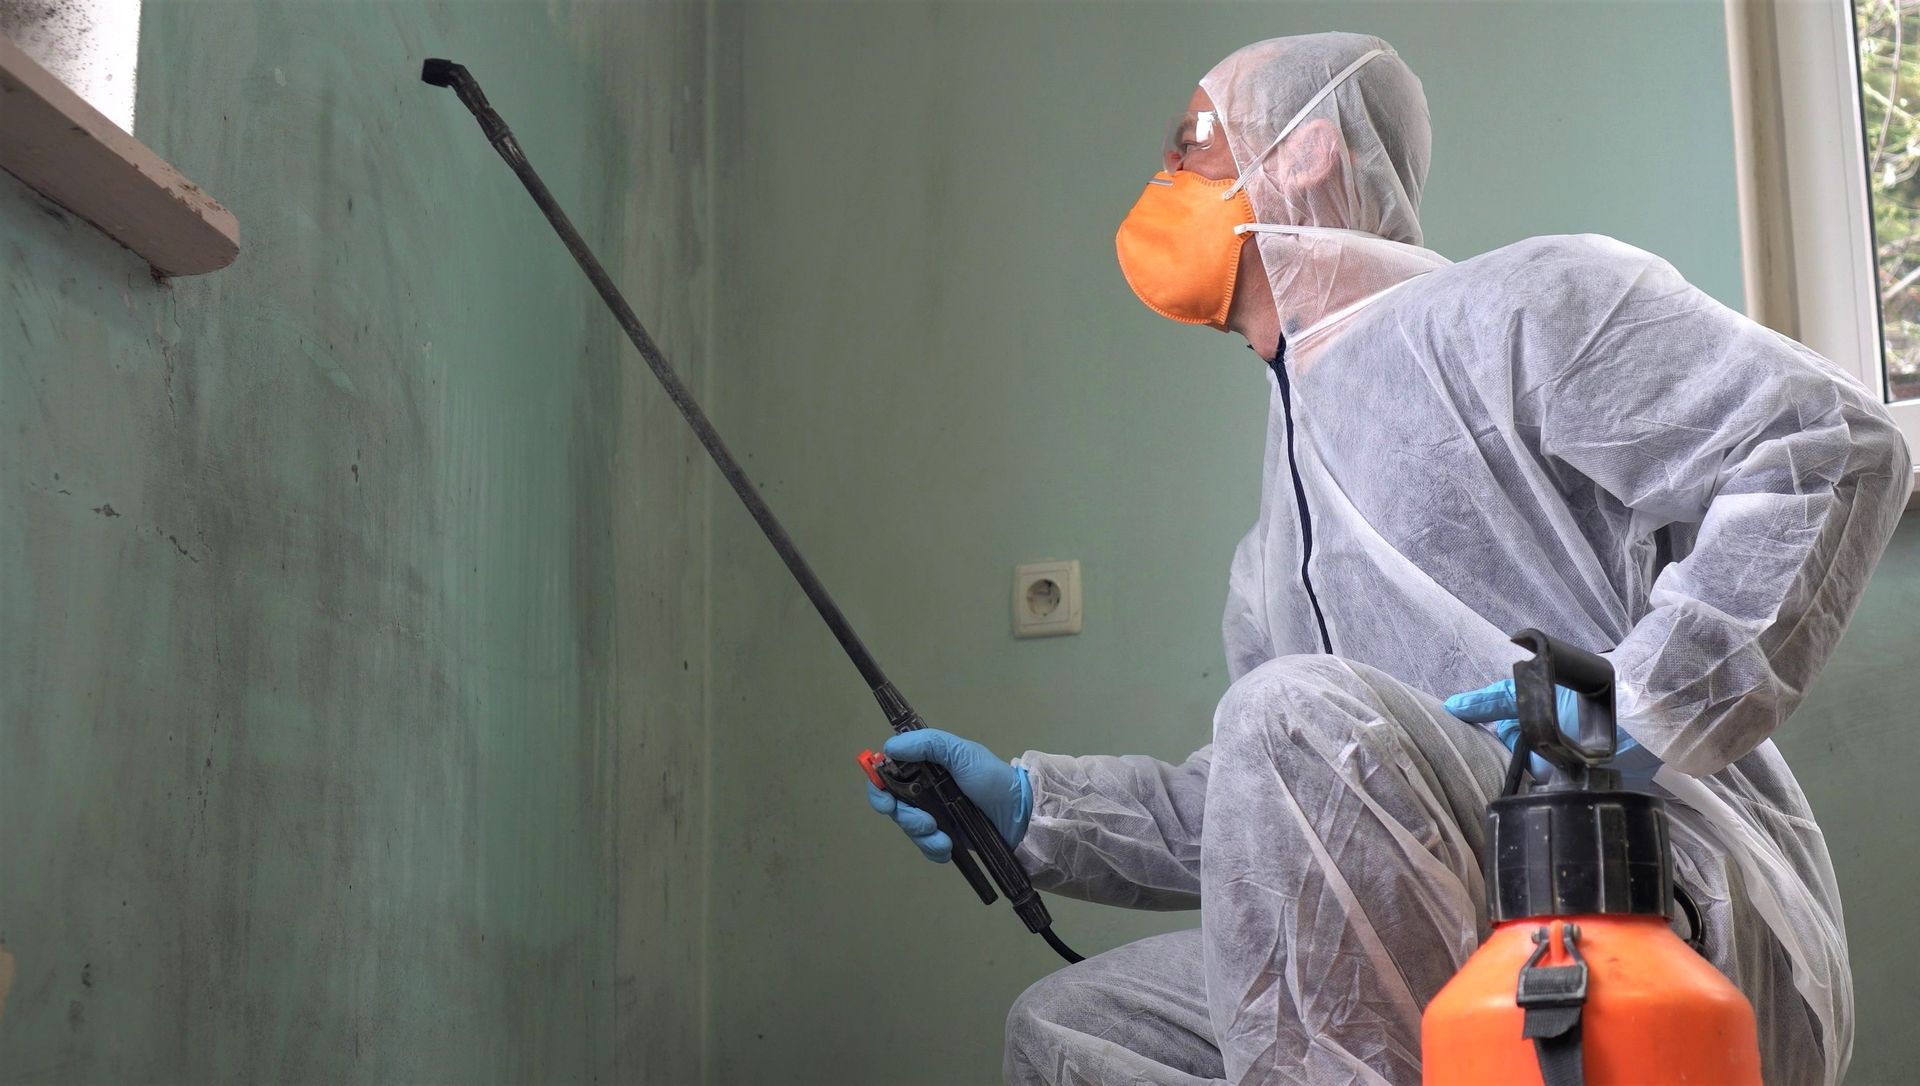 A man in a protective suit is spraying a wall with a sprayer